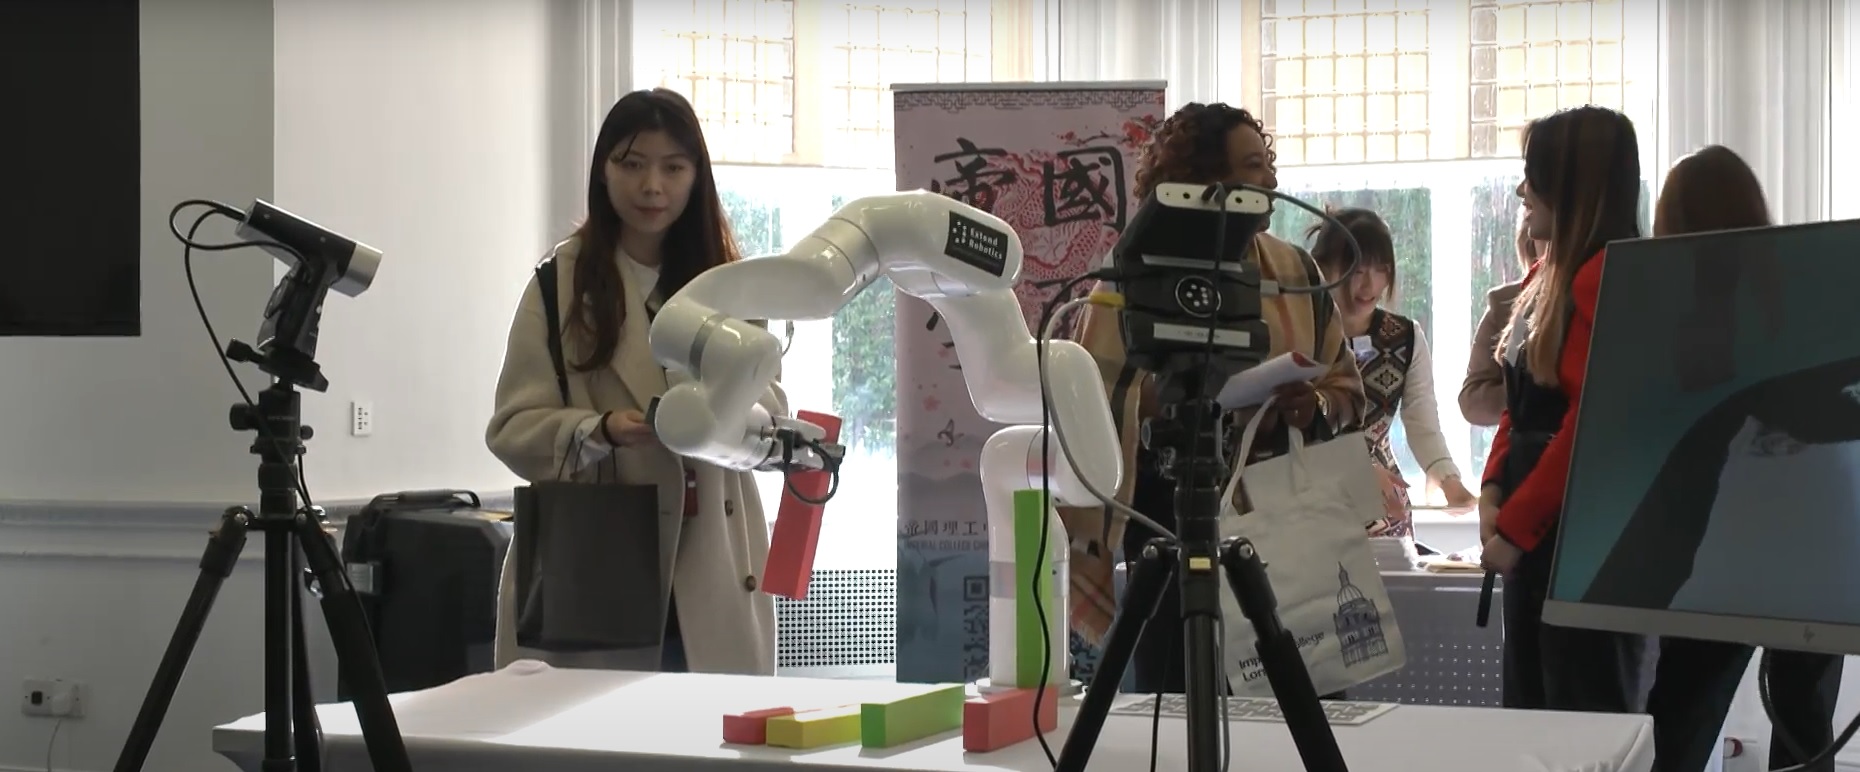 Extend Robotics, a UK-based company that uses mass market virtual reality headsets to enable people to control robot arms remotely, showcased their tech at the summit and are hoping to break into the Chinese market./CGTN.